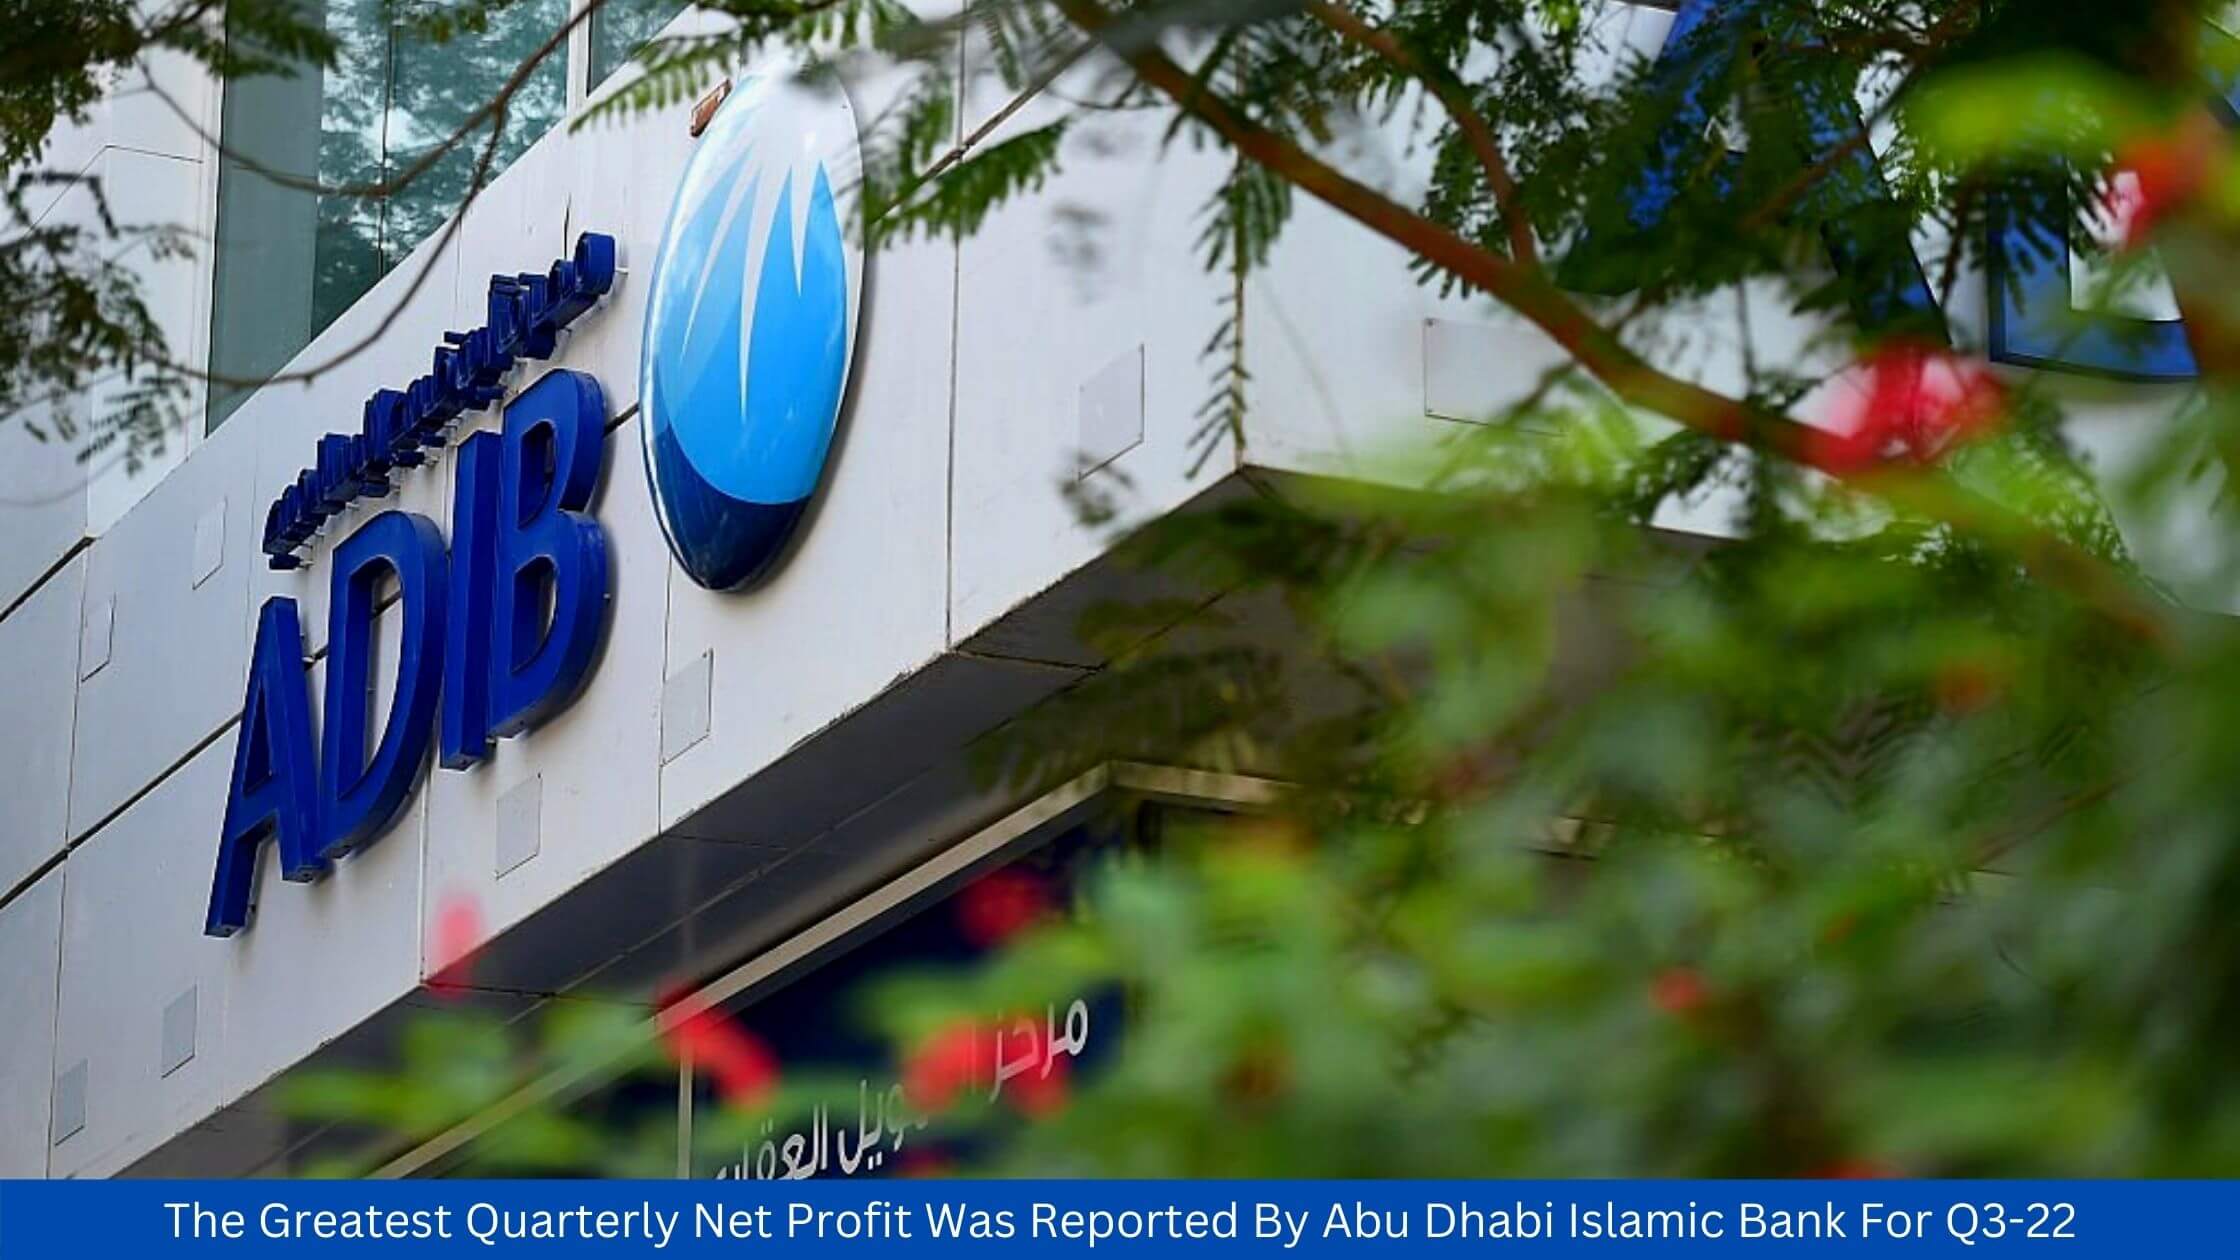 The Greatest Quarterly Net Profit Was Reported By Abu Dhabi Islamic Bank For Q3-22